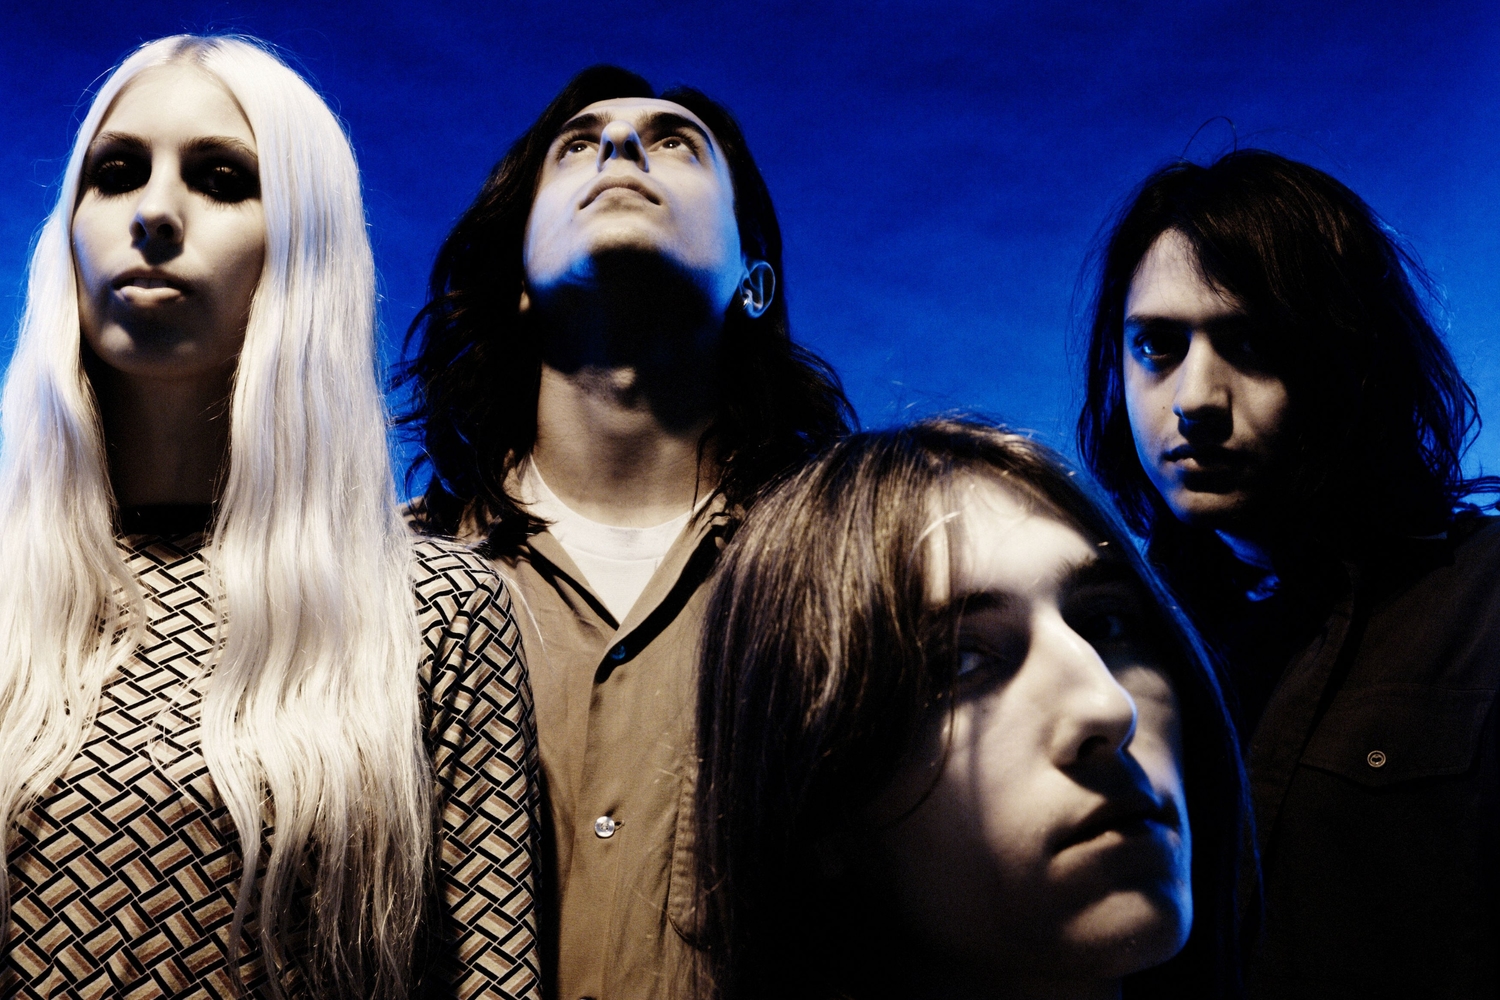 INHEAVEN: "Let’s make that band up - the one we’re waiting for, the one we want"